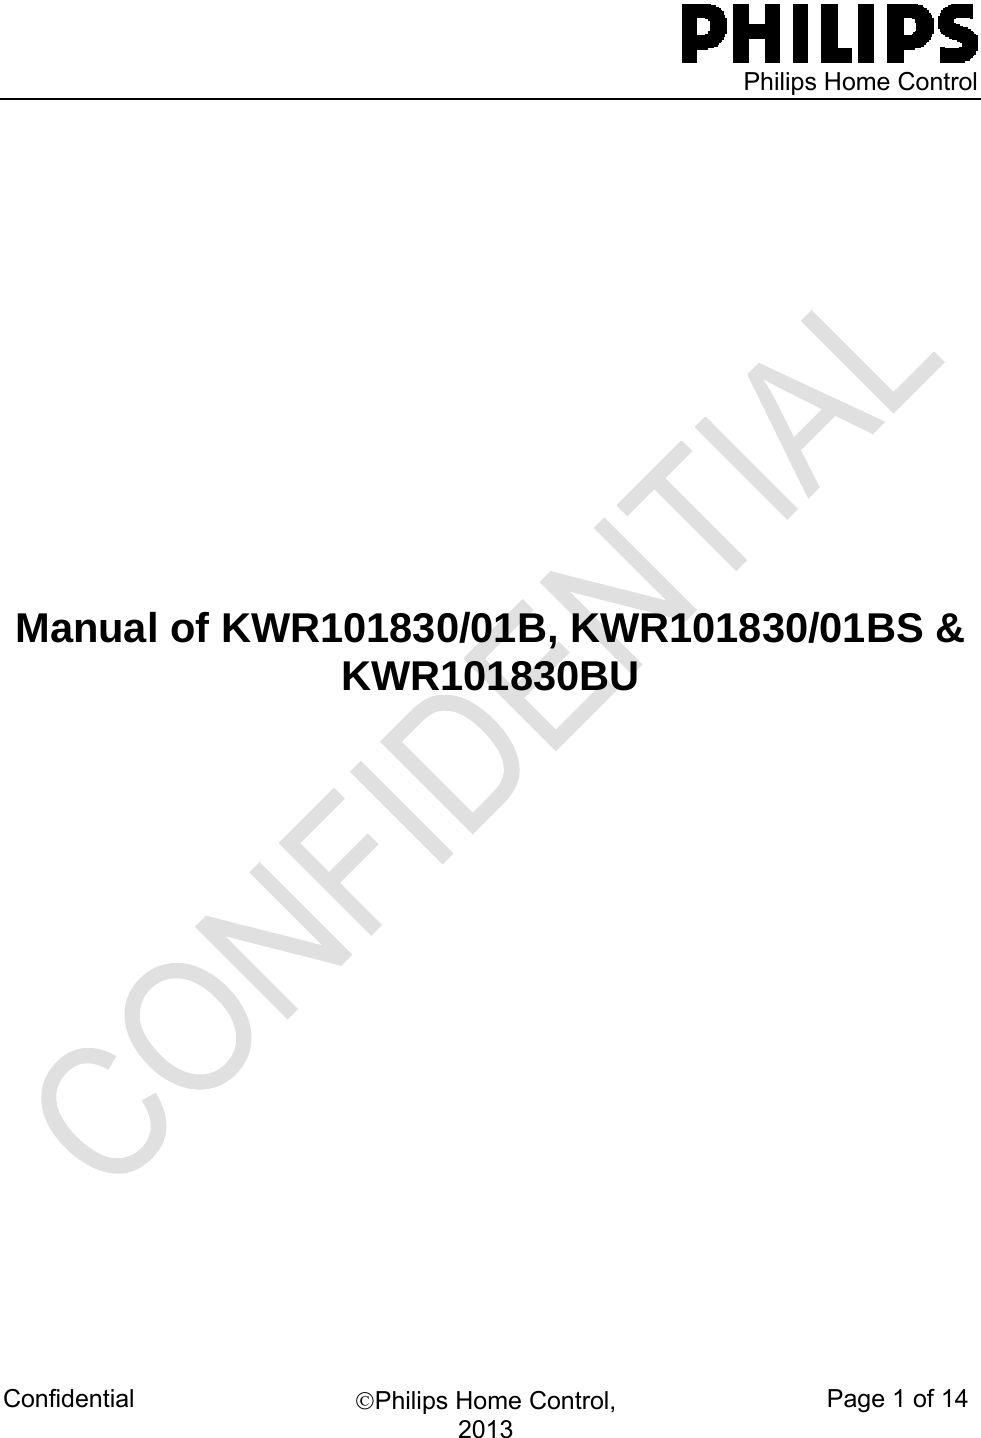   Philips Home Control Confidential  ©Philips Home Control, 2013 Page 1 of 14       Manual of KWR101830/01B, KWR101830/01BS &amp; KWR101830BU                                                                                               